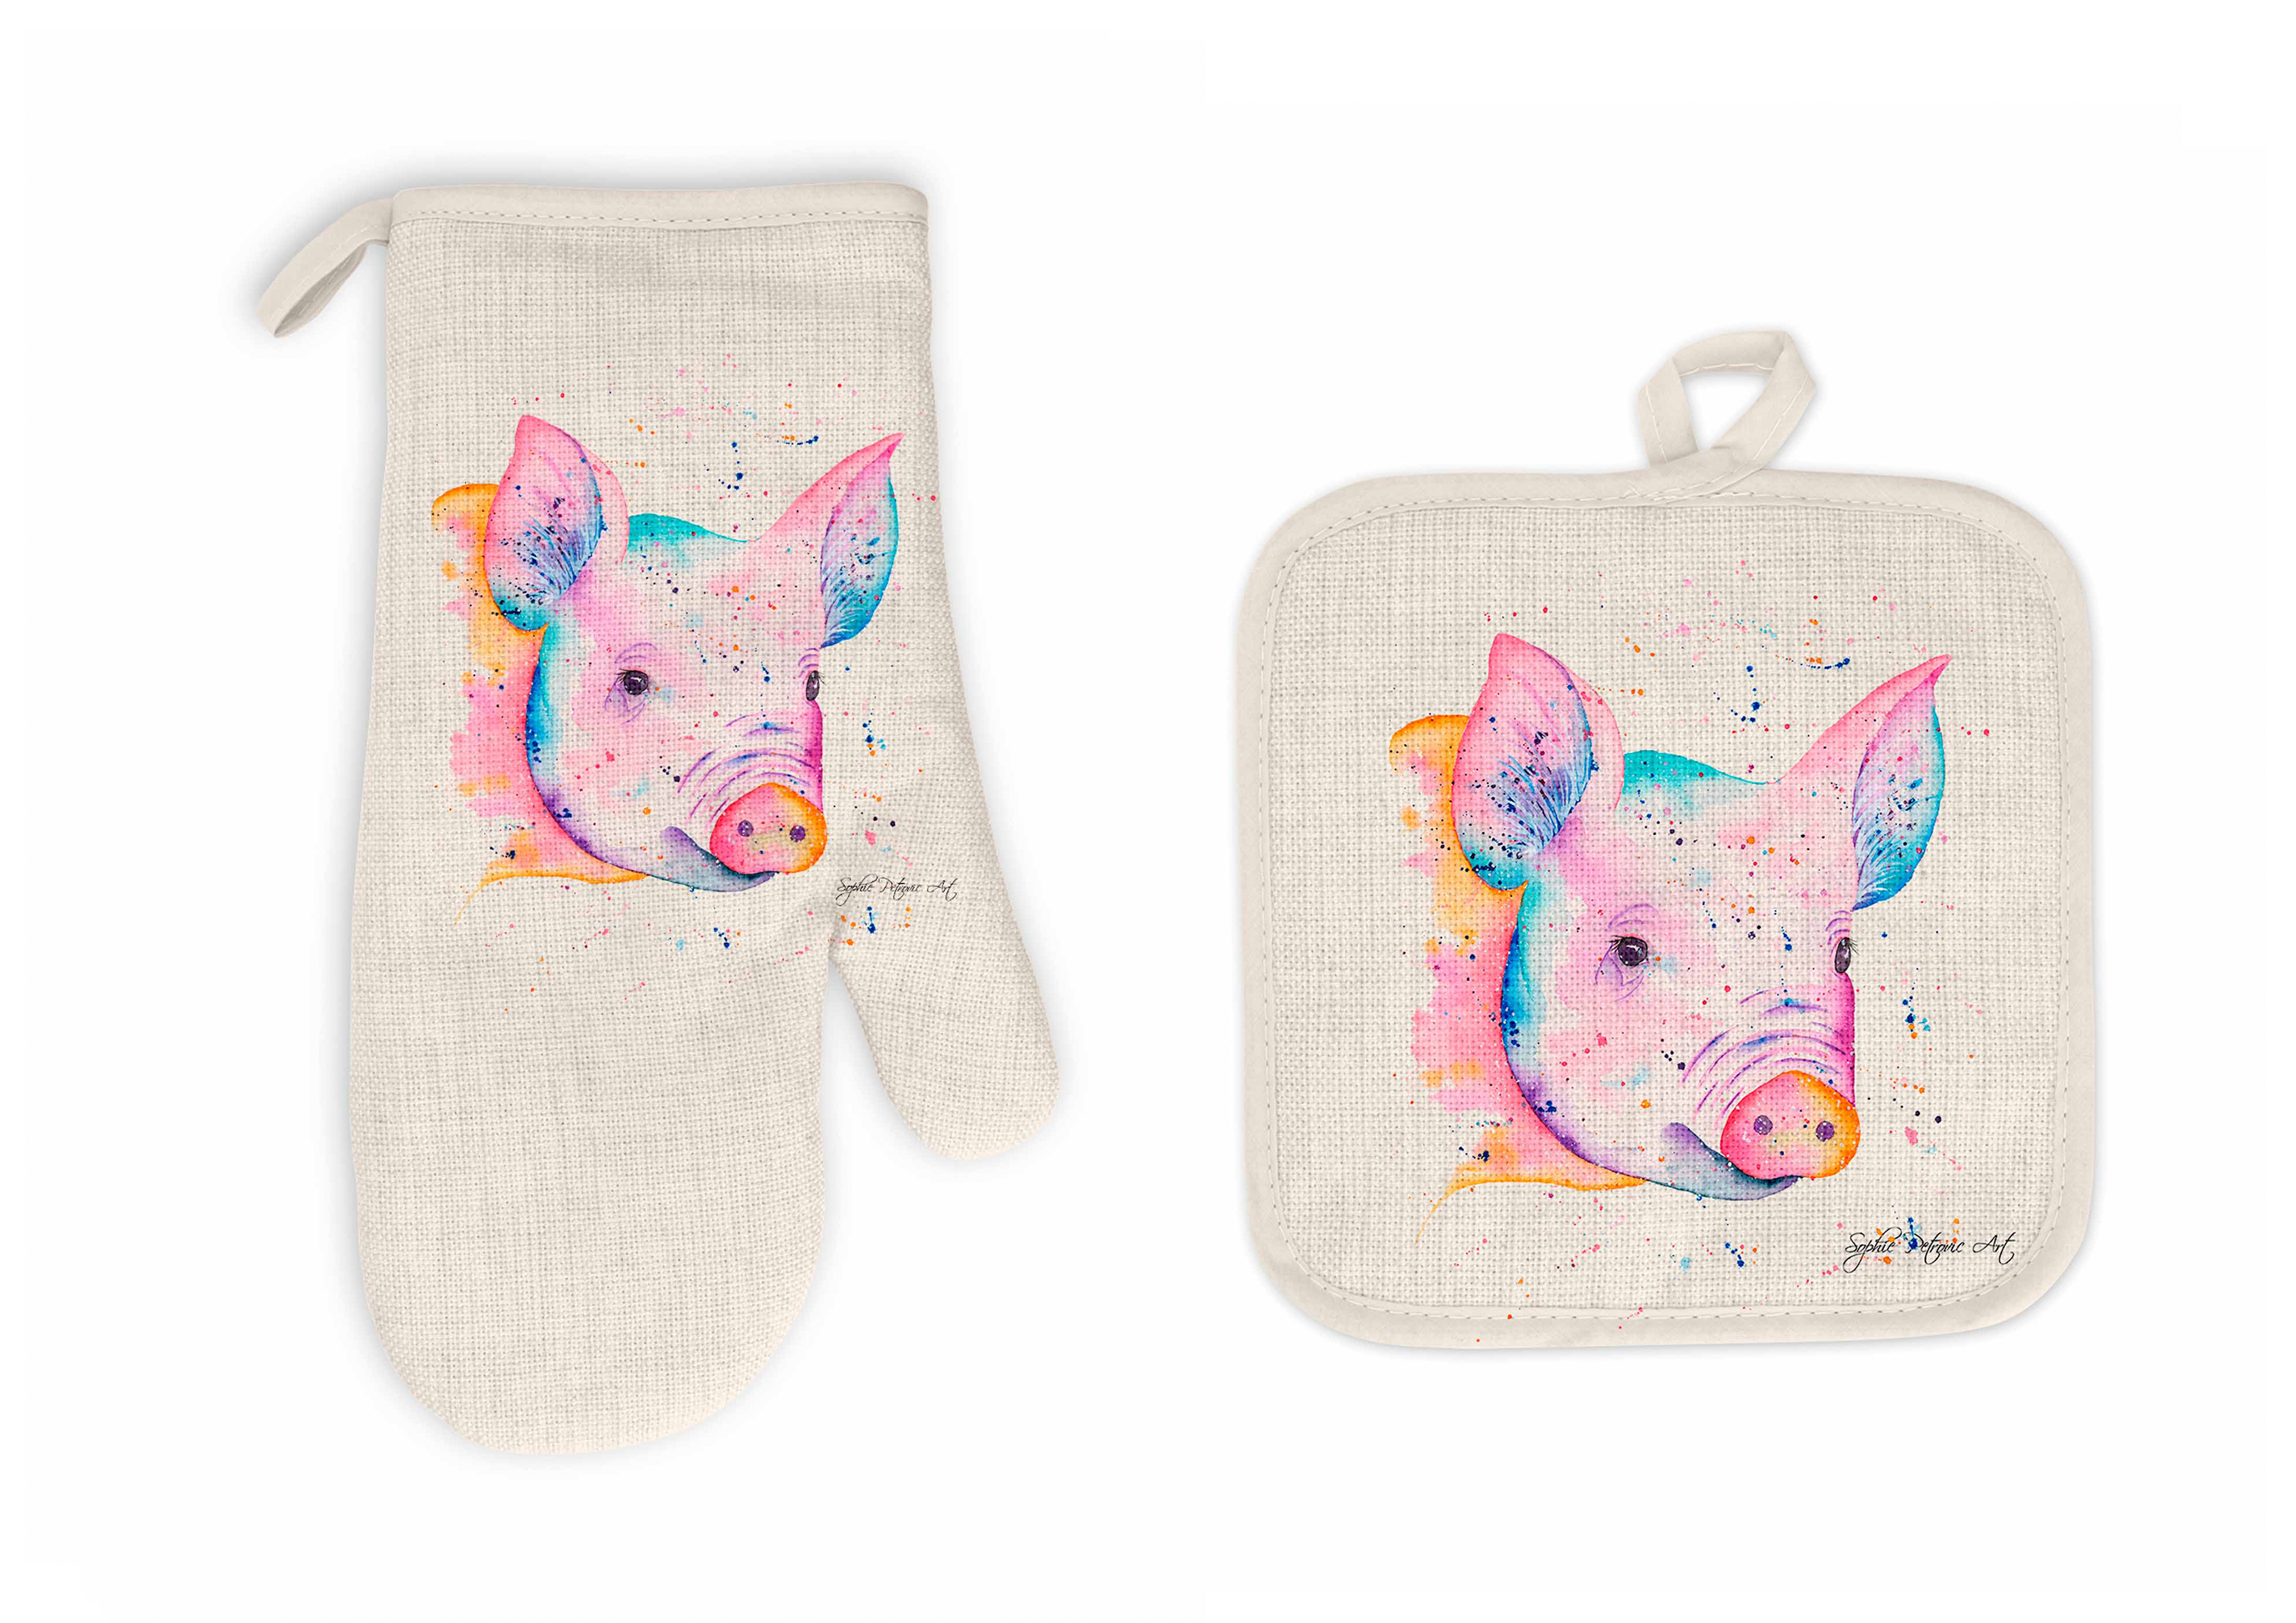 Cute Pig Print Oven Mitts and Pot Holders Set, Pot Holders for Kitchen,  Oven Mitts Set, Oven Glove, Kitchen Mittens, Oven Mittens, Pot Holder Set